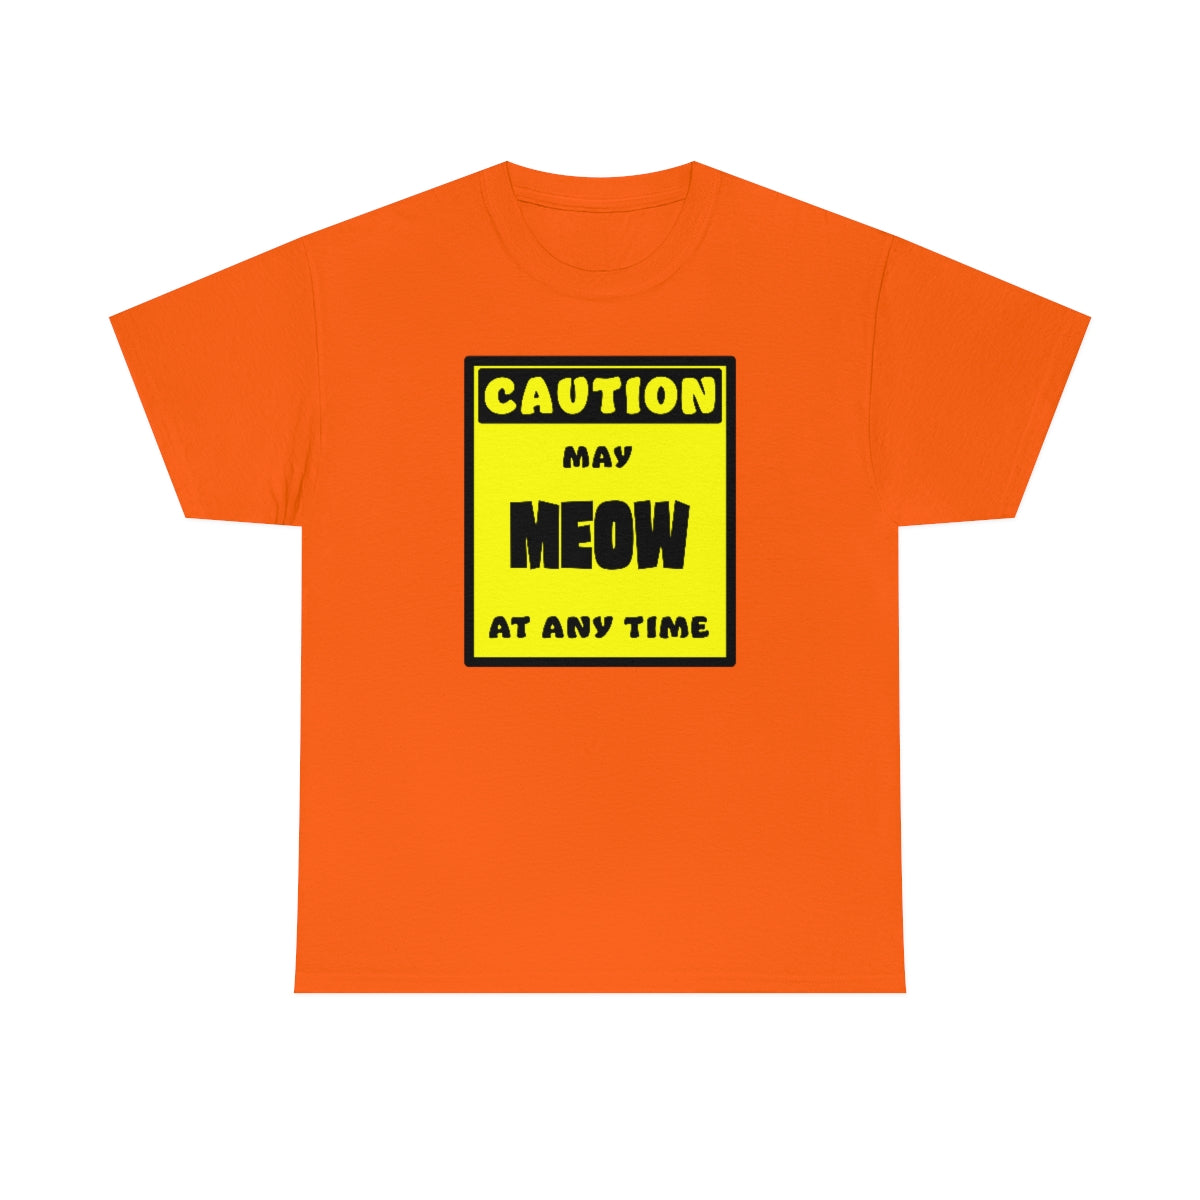 CAUTION! May MEOW at any time! - T-Shirt T-Shirt AFLT-Whootorca Orange S 